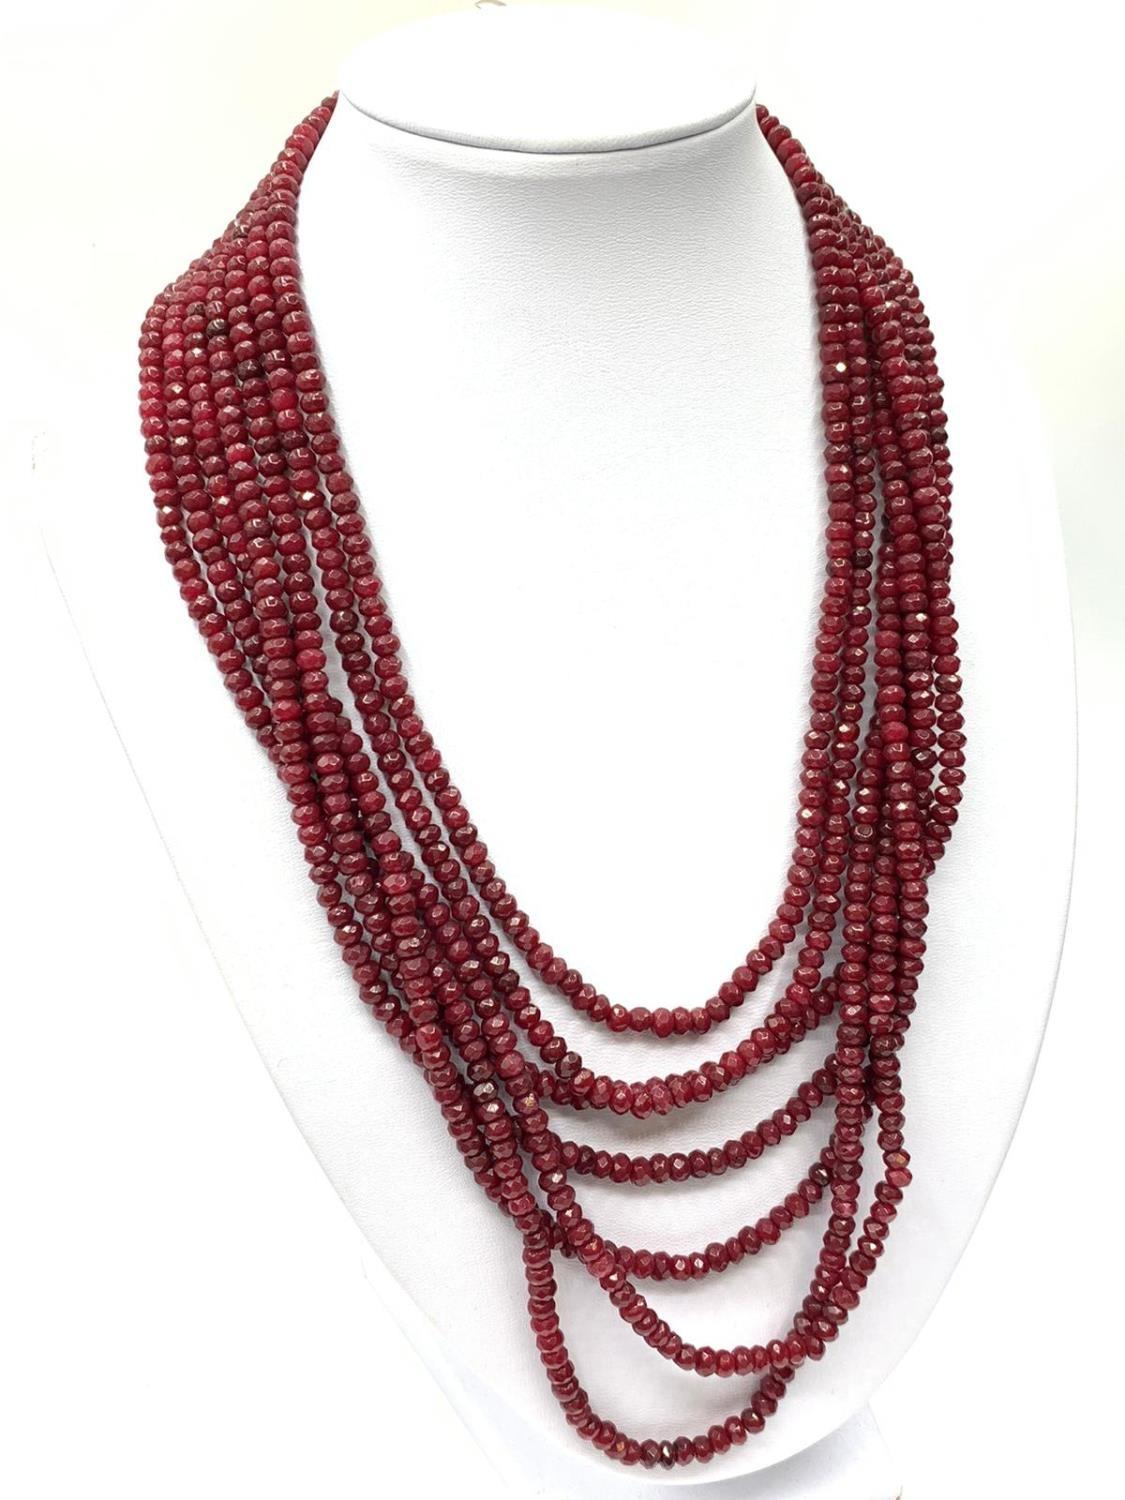 An impressive seven row multi-faceted ruby necklace, Length 44-60cm Weight: 106 g. Rubies are colour